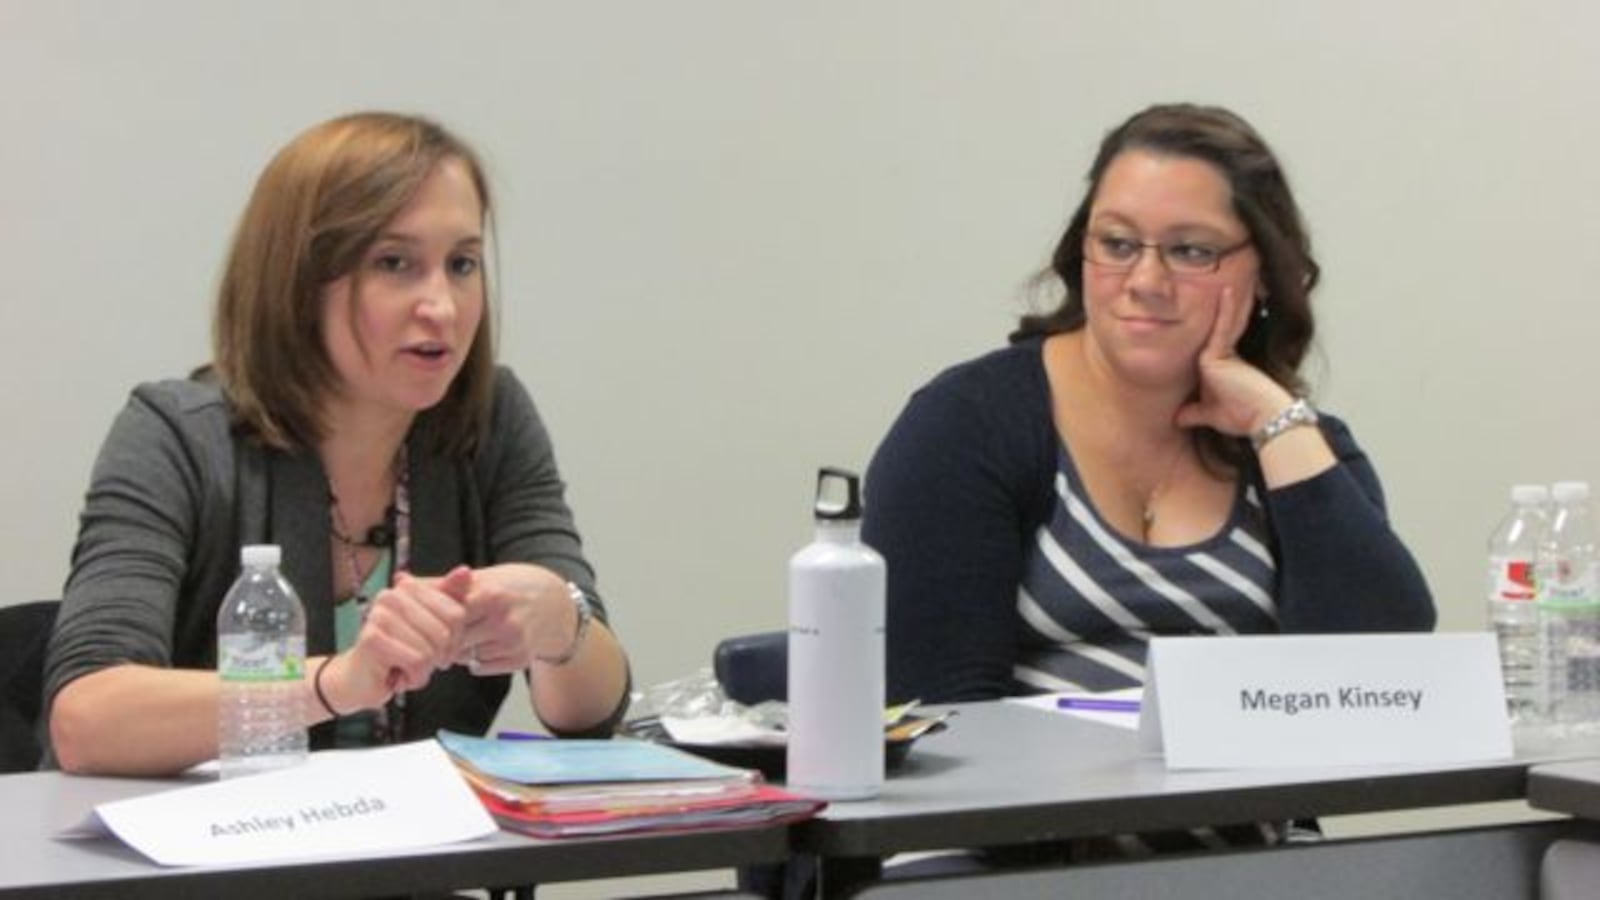 Teachers Ashley Hebda and Megan Kinsey discuss teacher evaluation at a meeting hosted by TeachPlus last year.